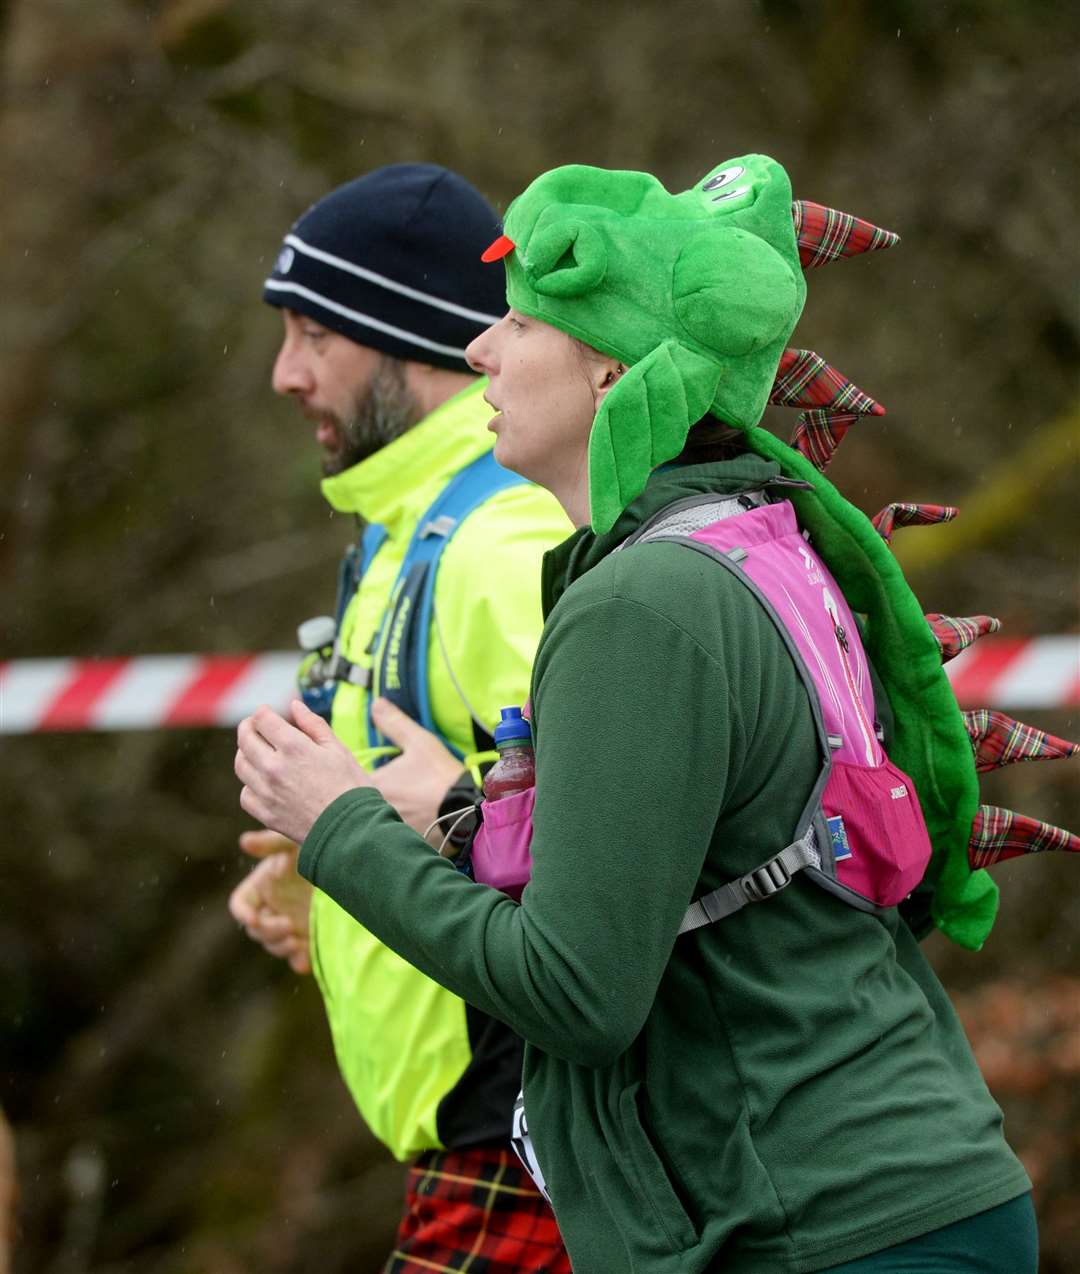 It is not uncommon to see people completing the course in costumes and kilts as the race's charity aspect comes to the fore. Picture: James MacKenzie